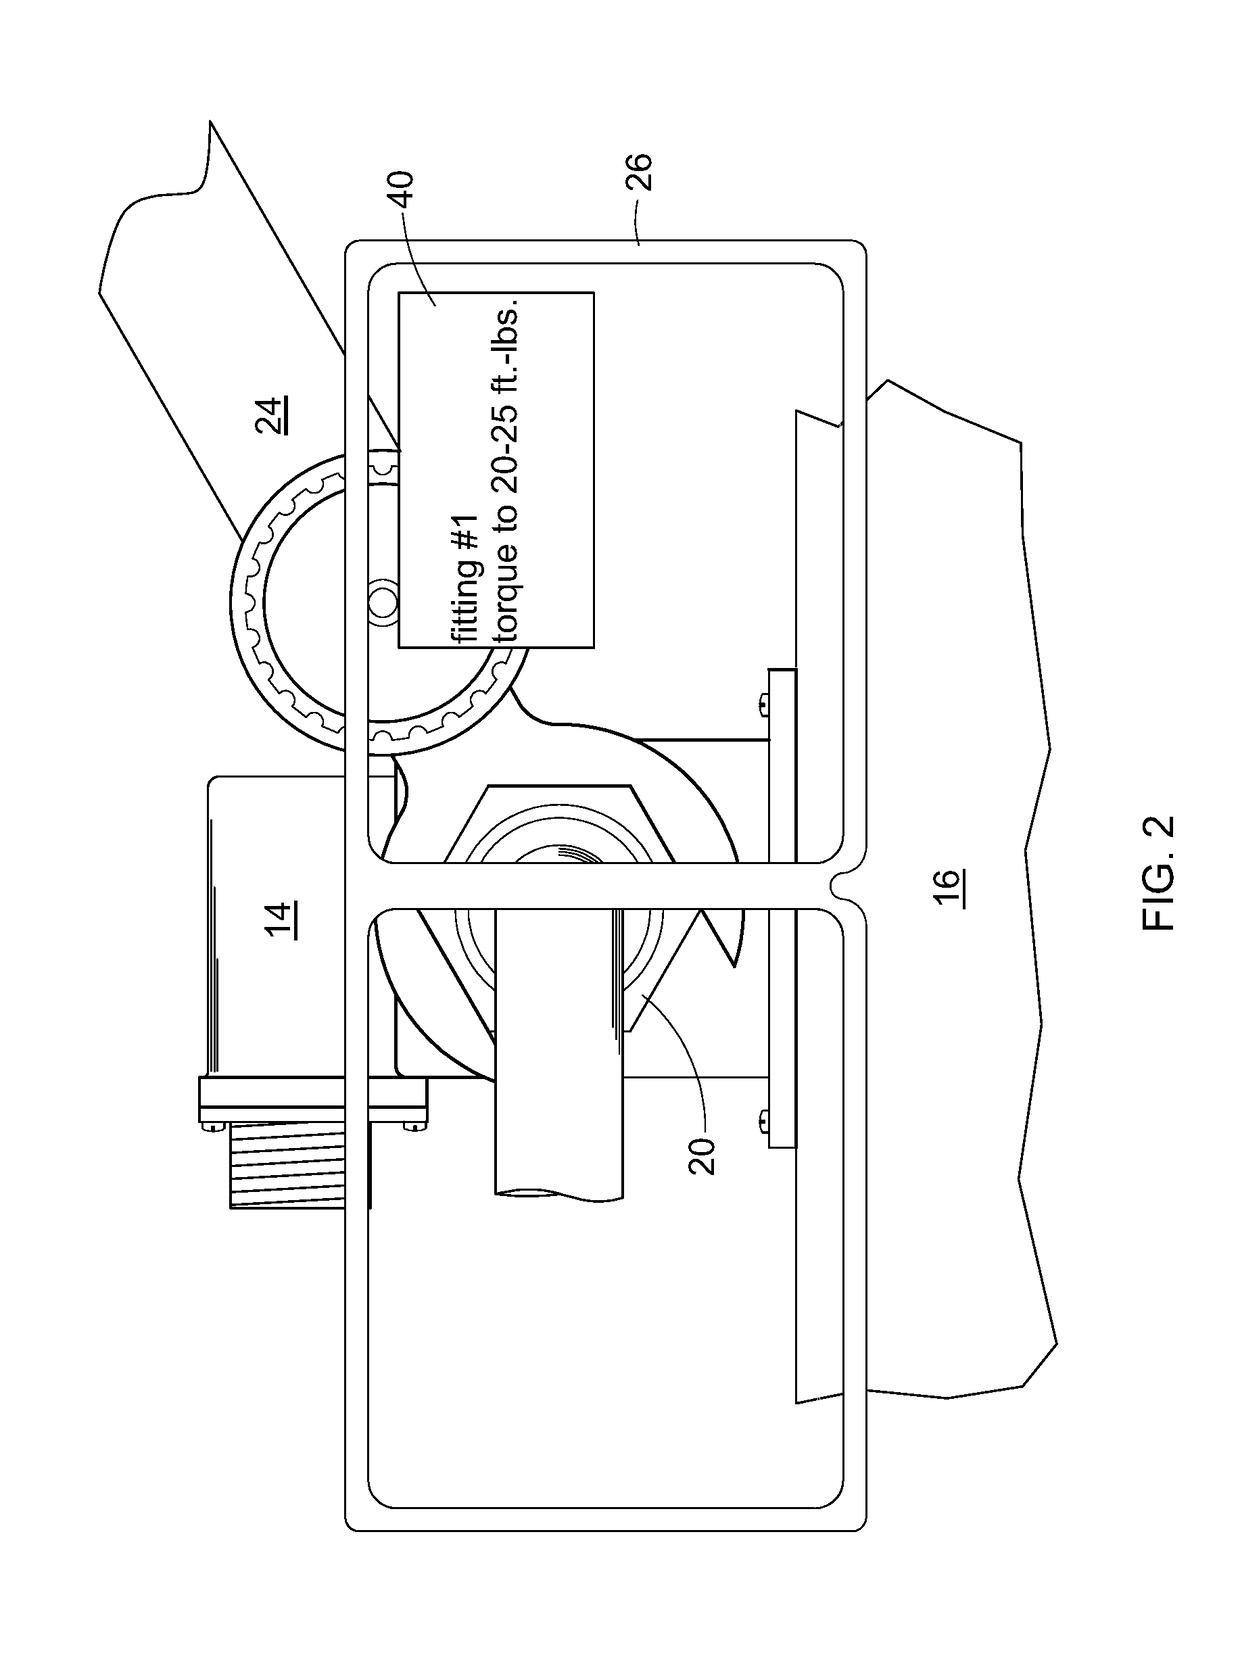 System and method for using wearable technology in manufacturing and maintenance